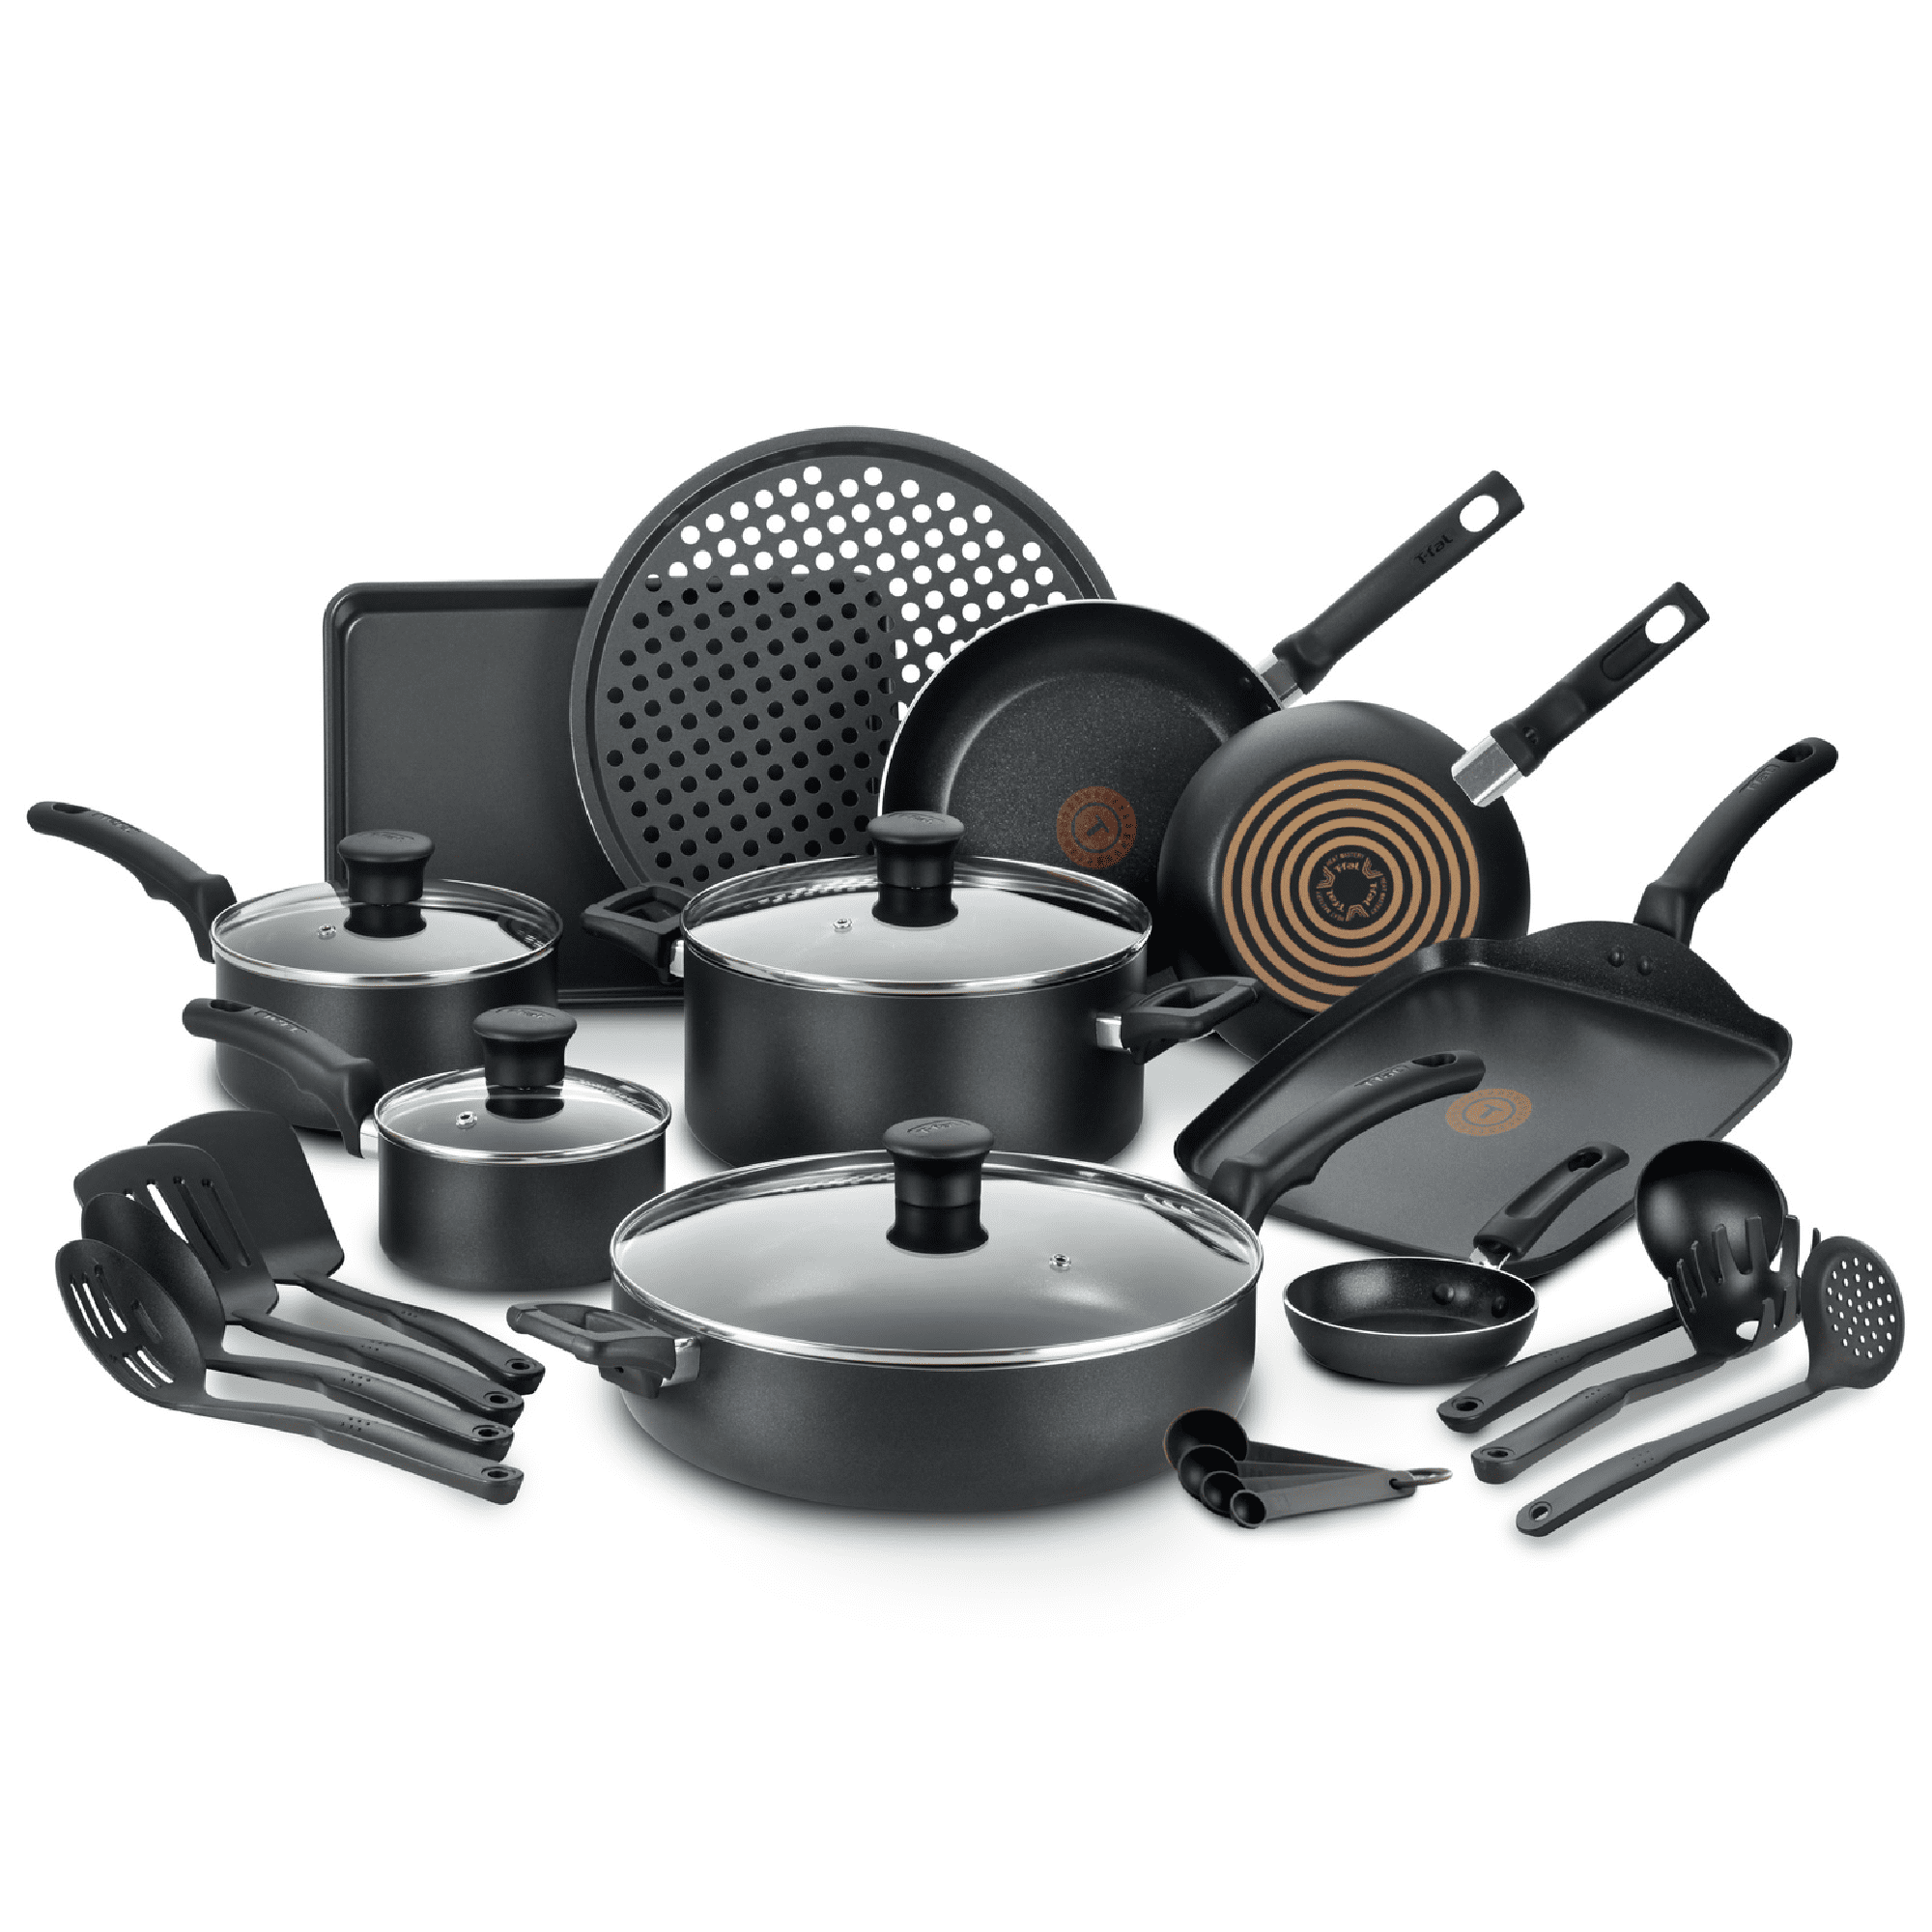 T Fal Cookware Black Friday Mail In Rebate